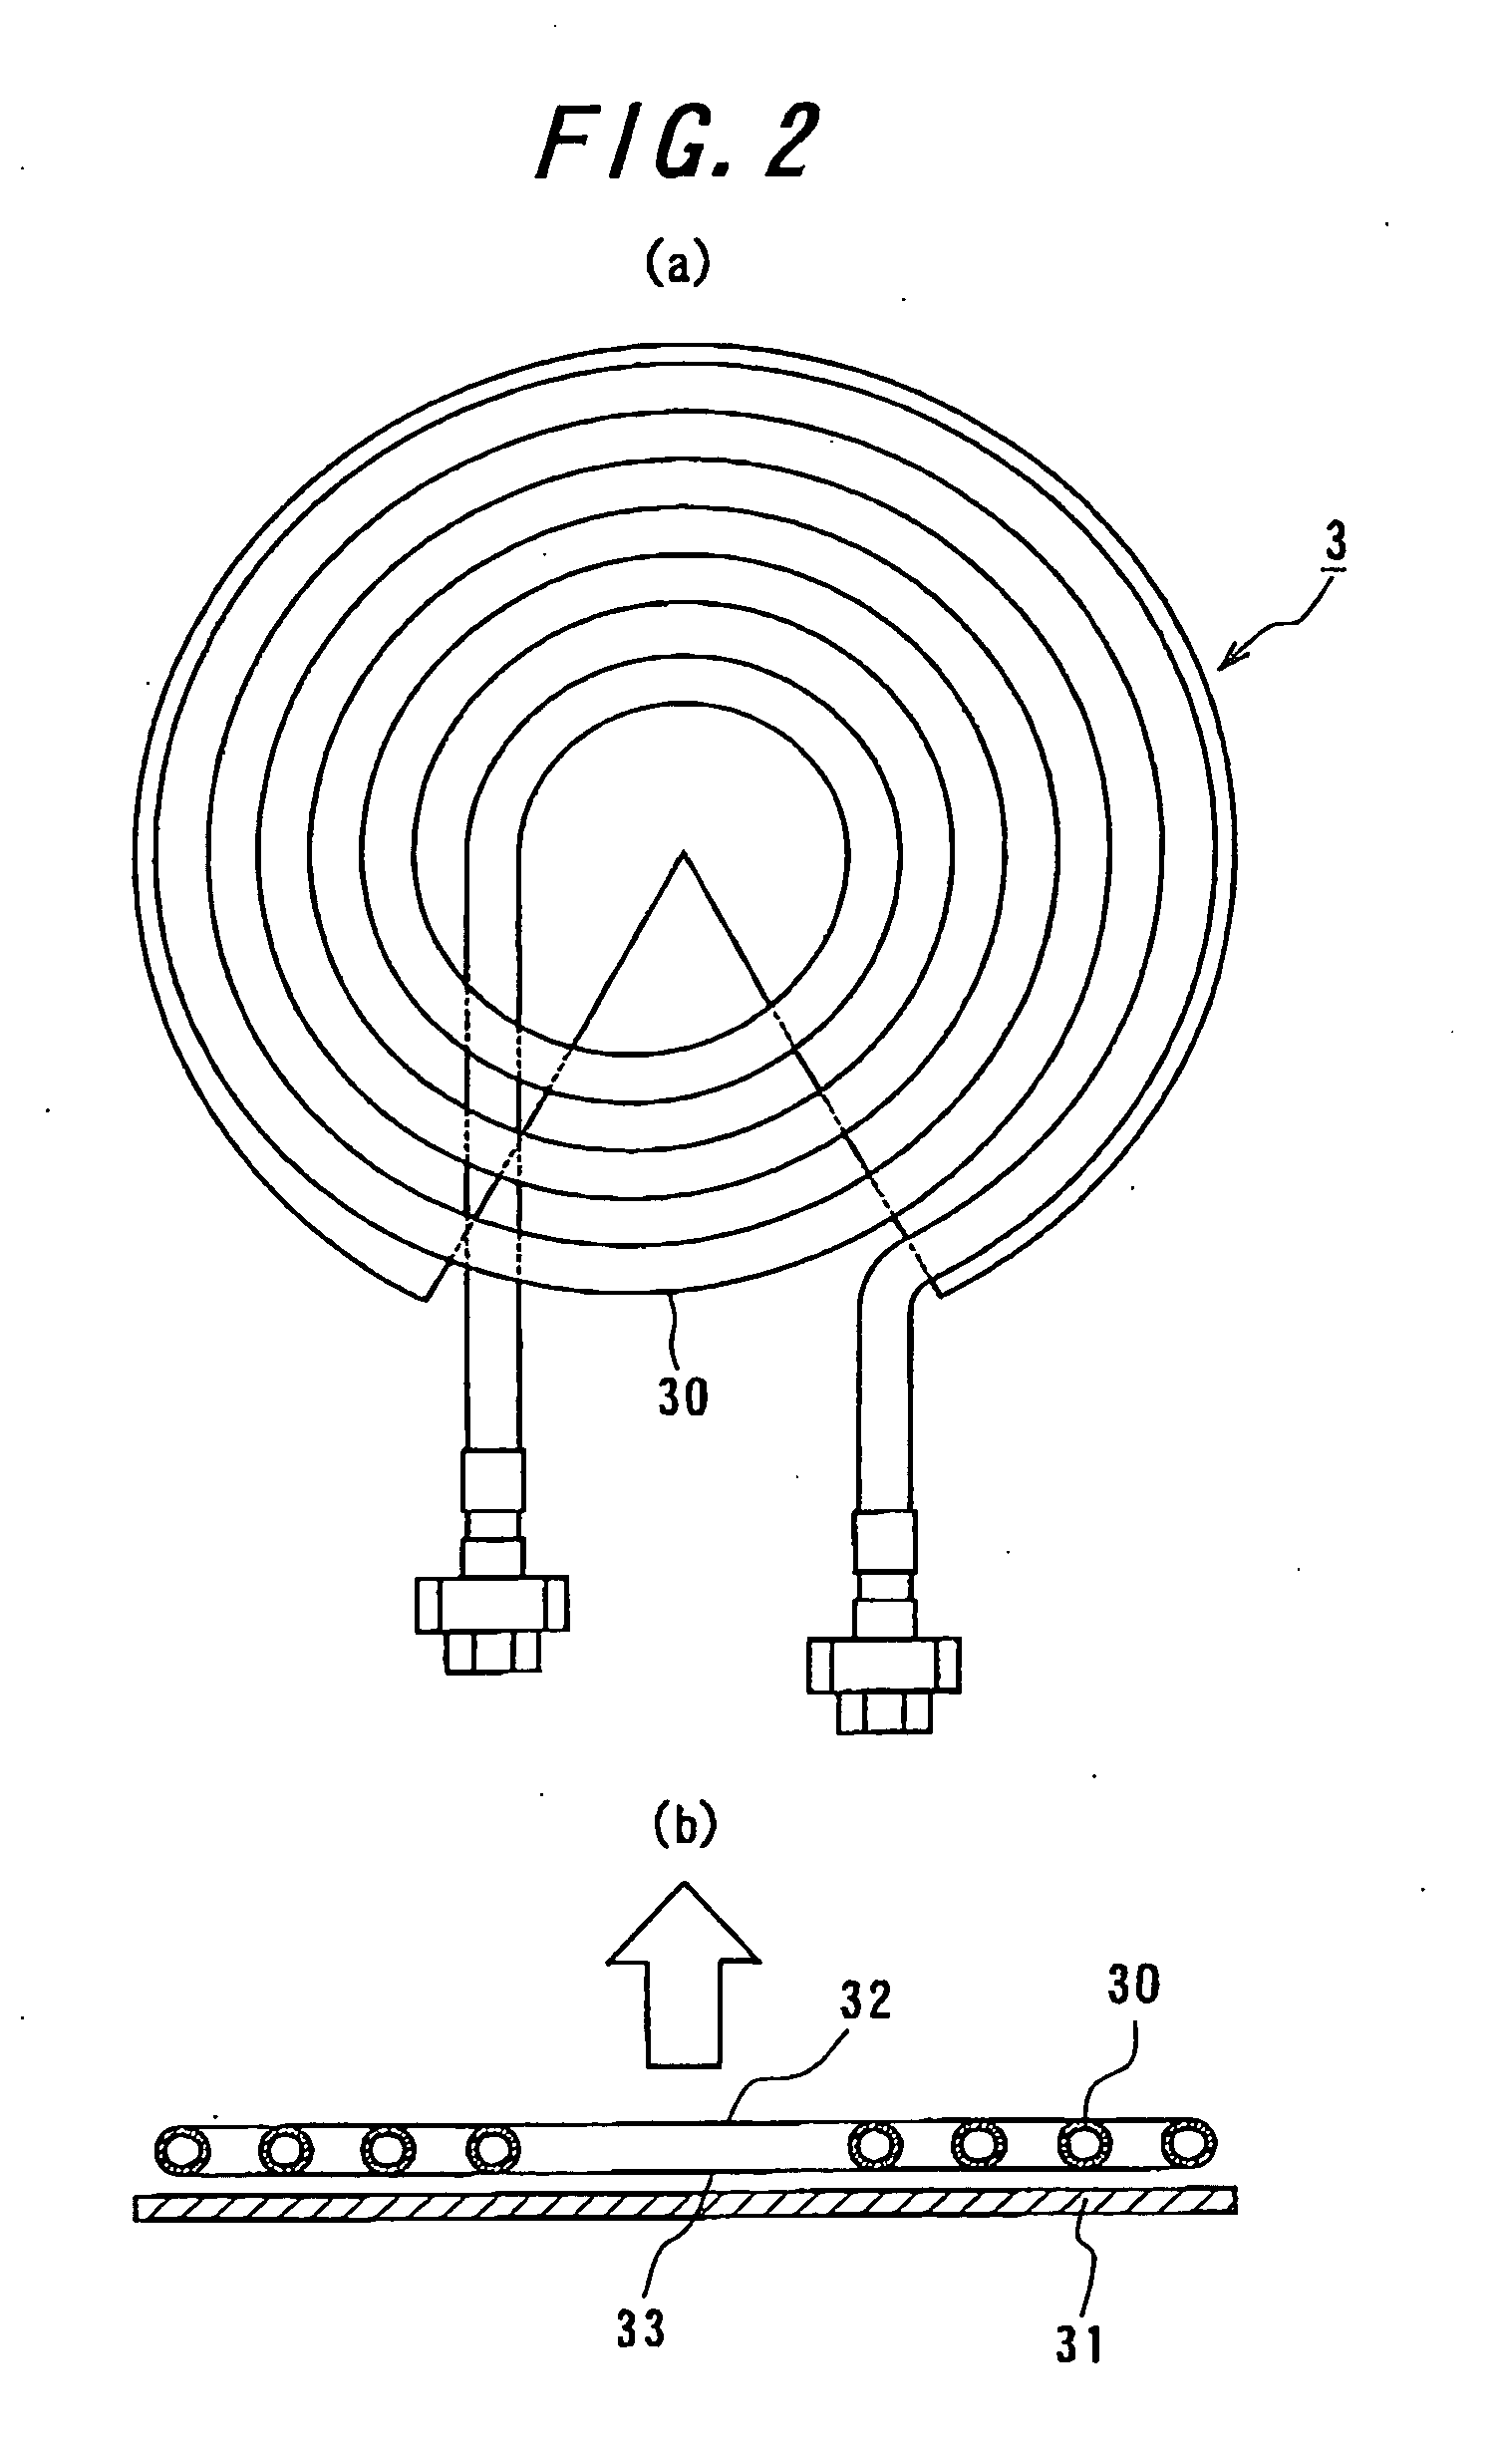 Thermal therapy device